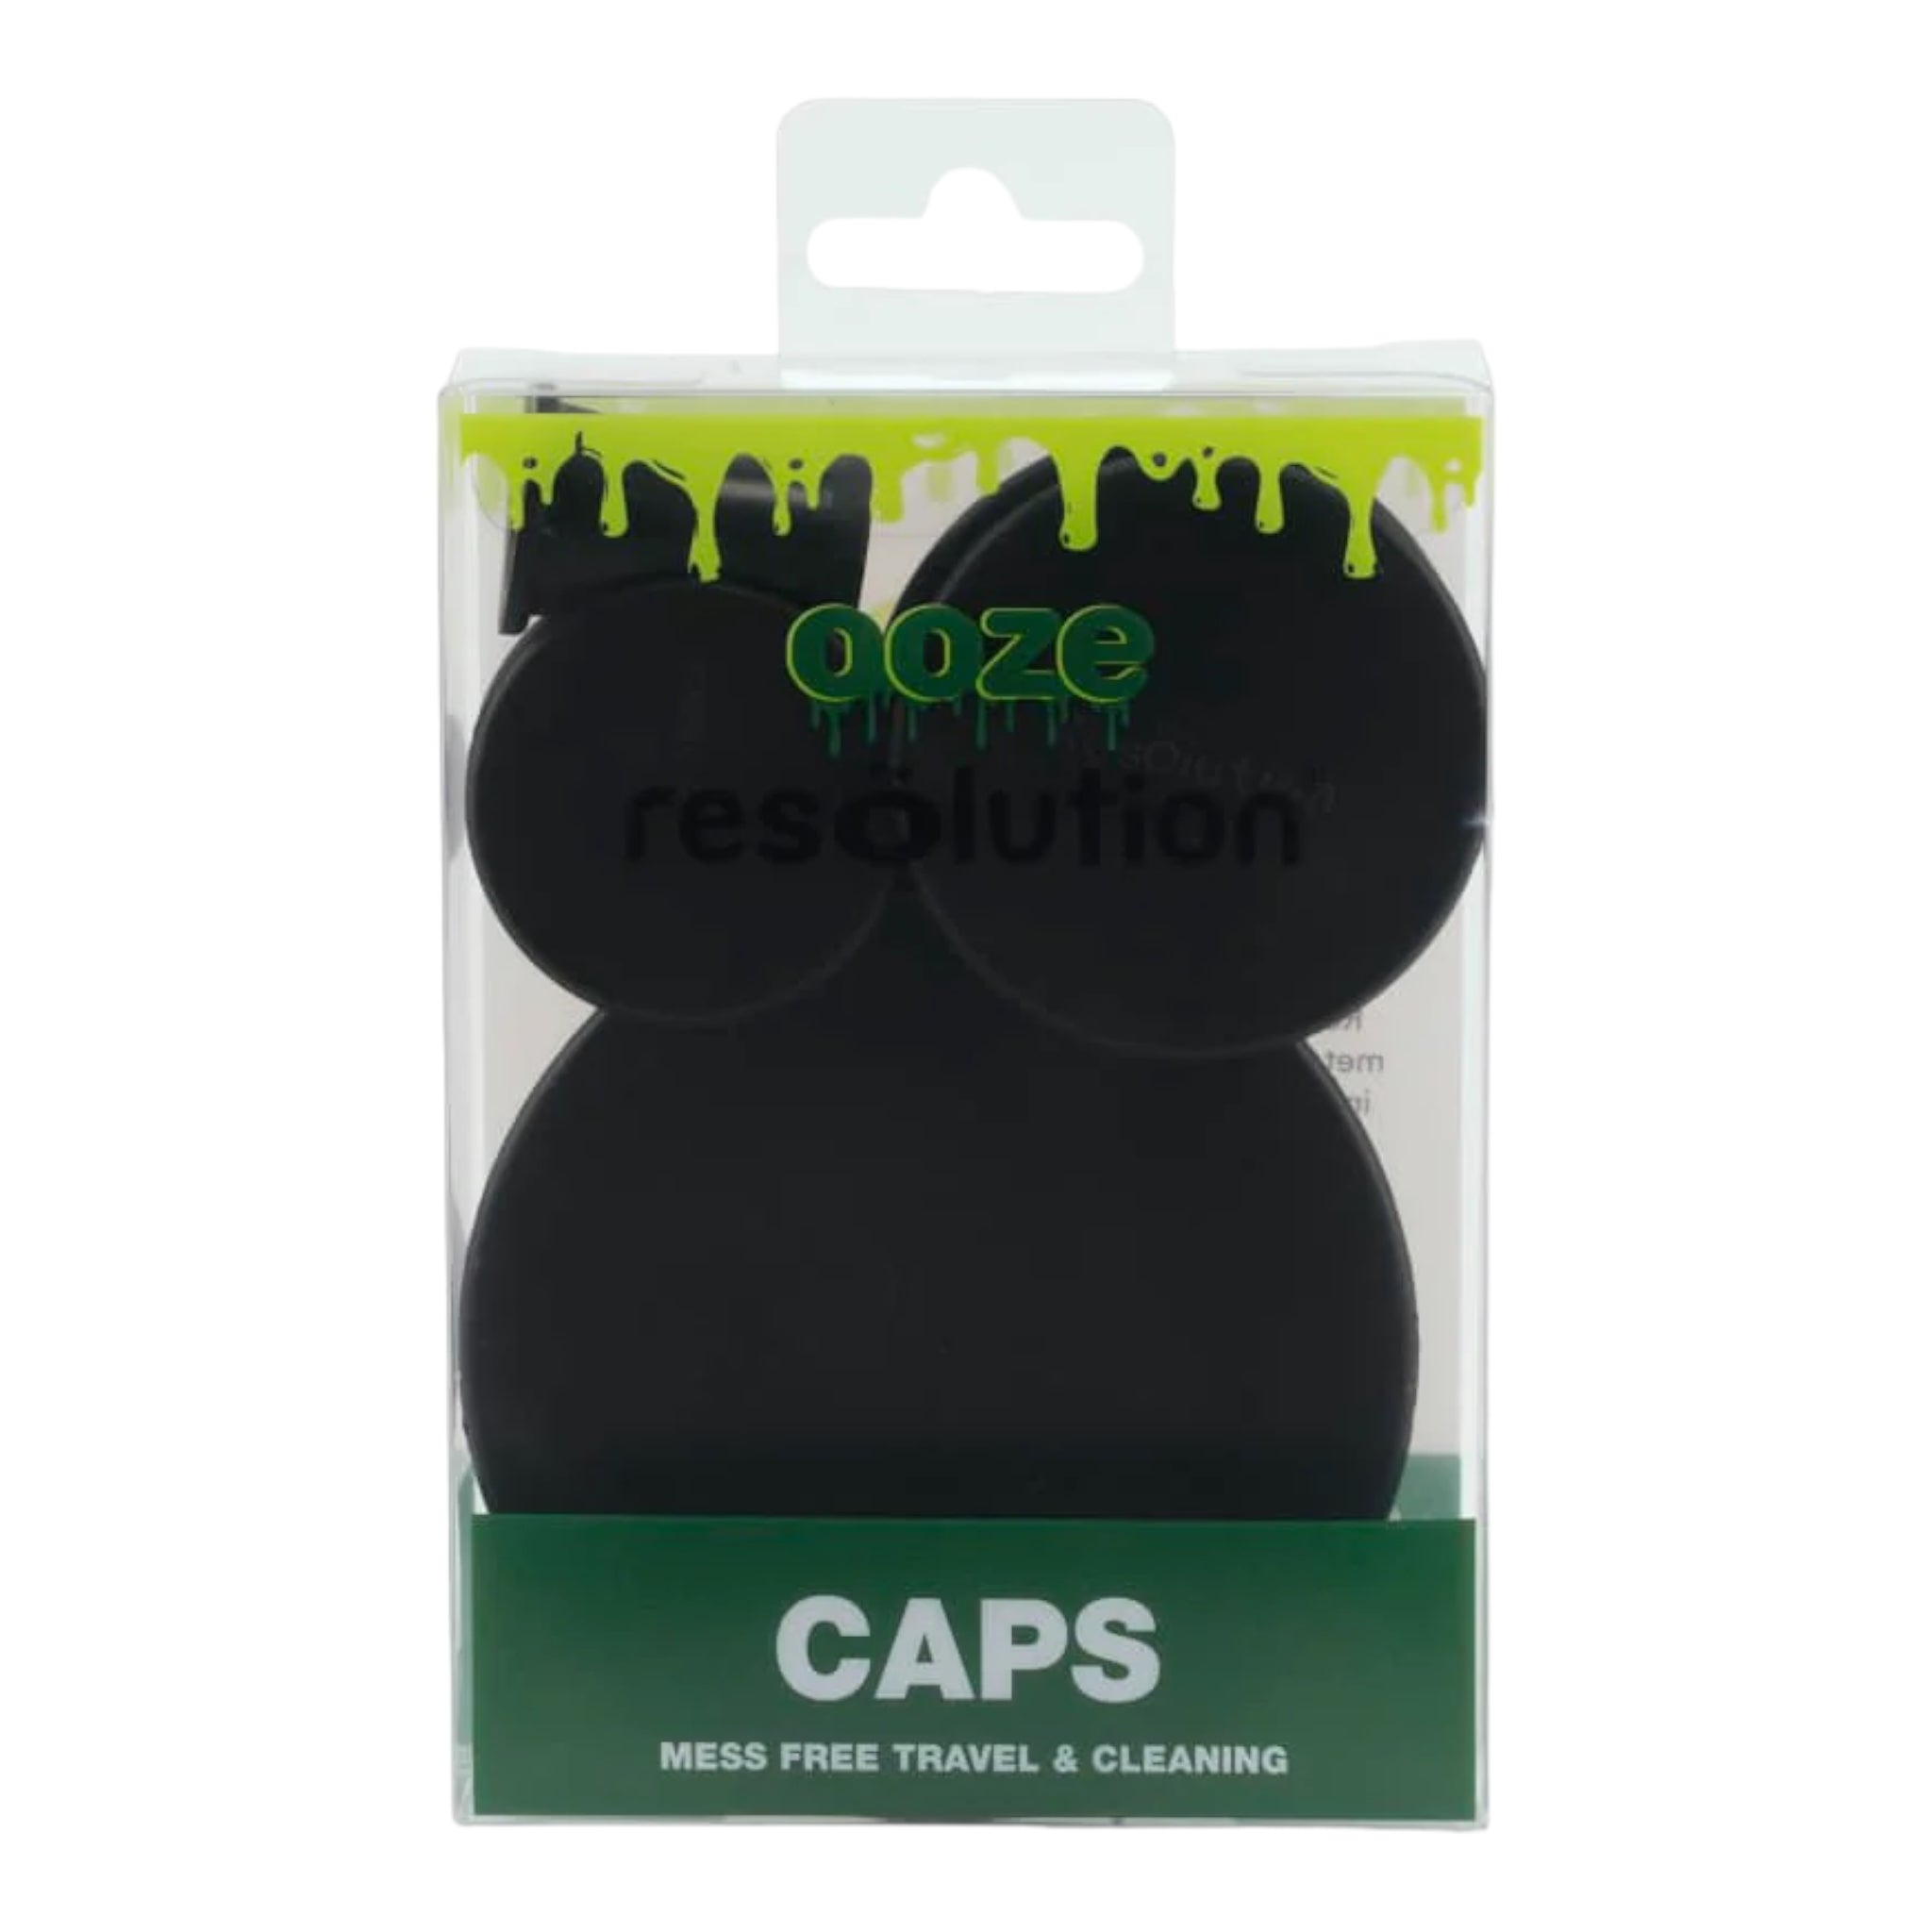 Ooze Resolution Silicone Res Caps For Cleaning Bongs And Dab Rigs